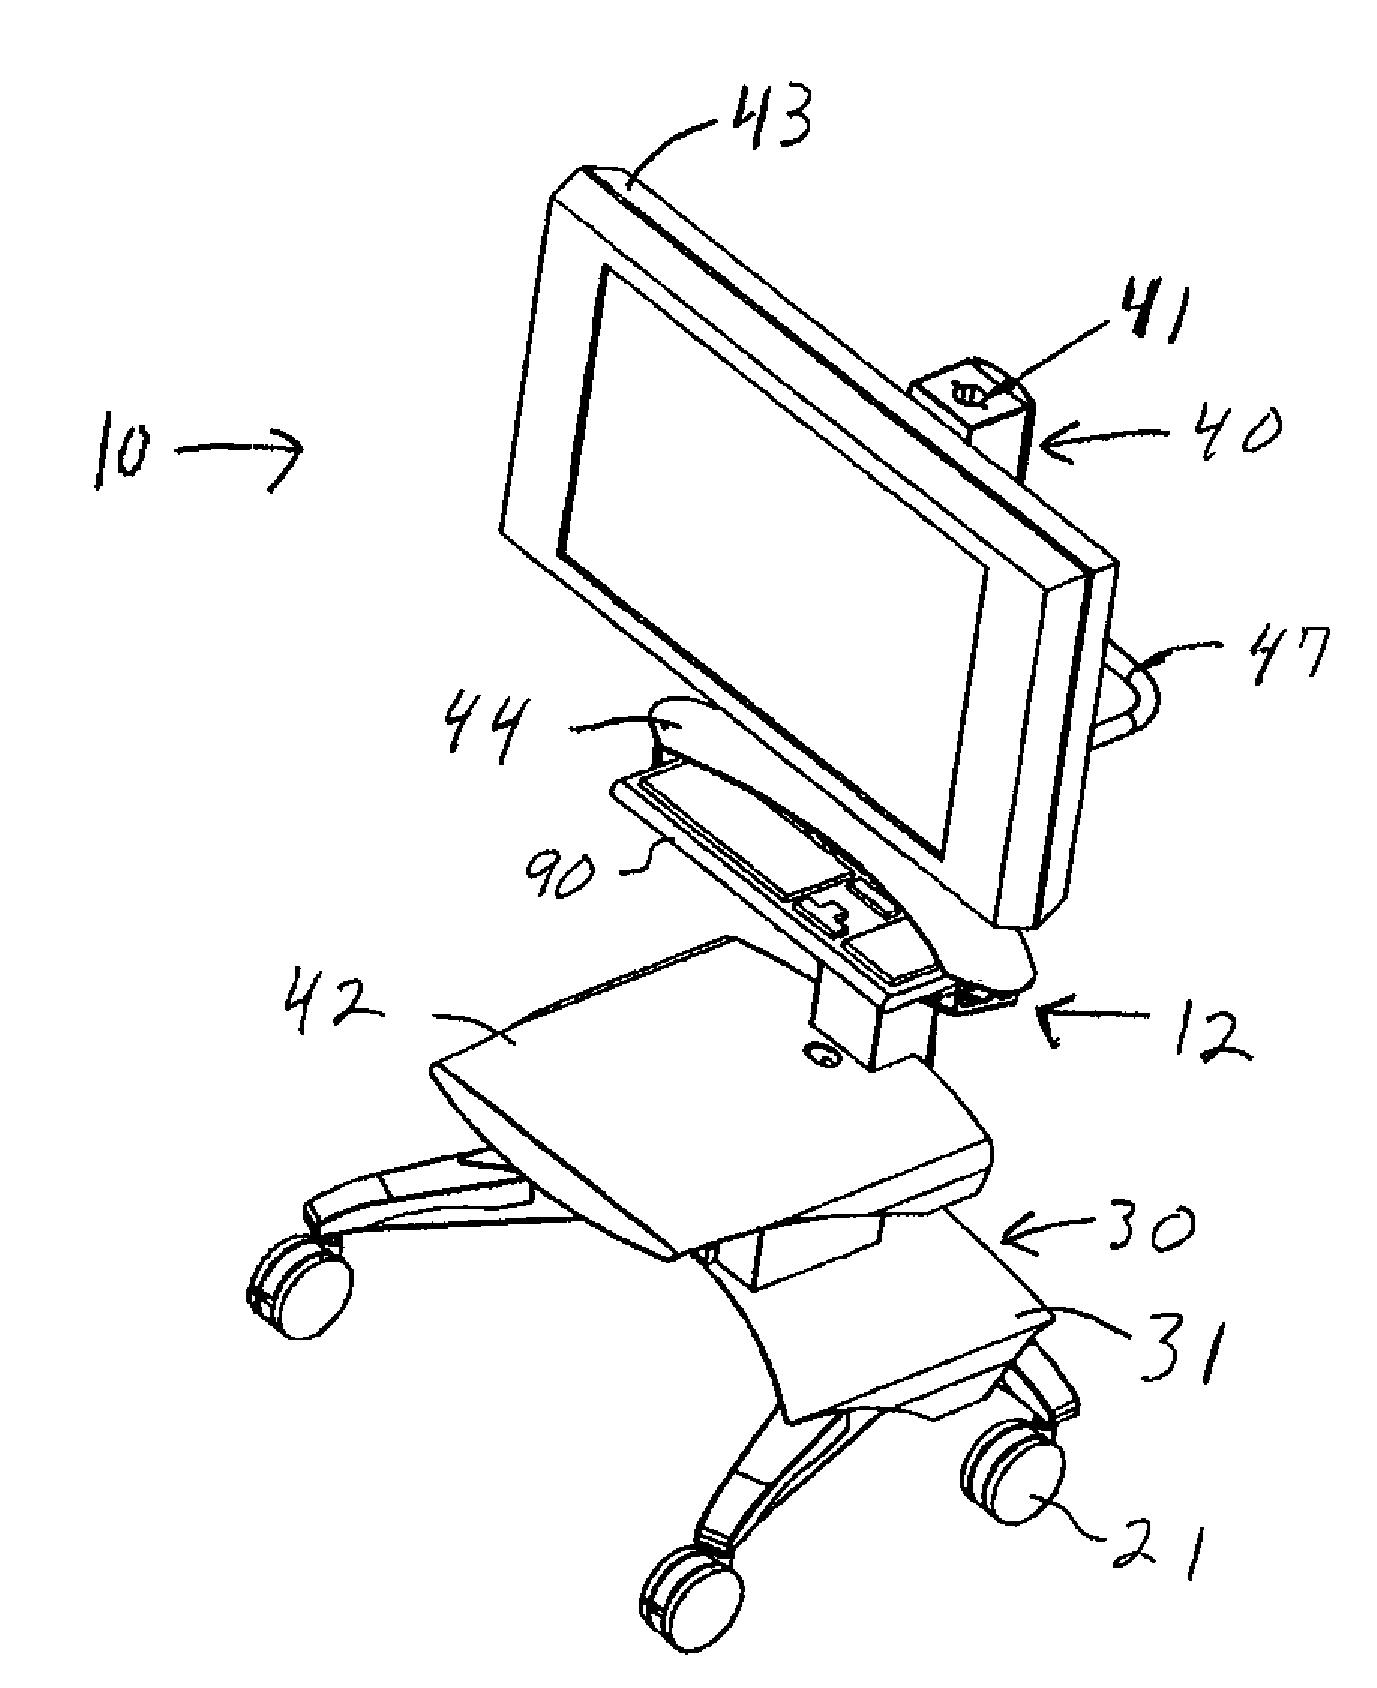 Mobile flat panel monitor and computer cart